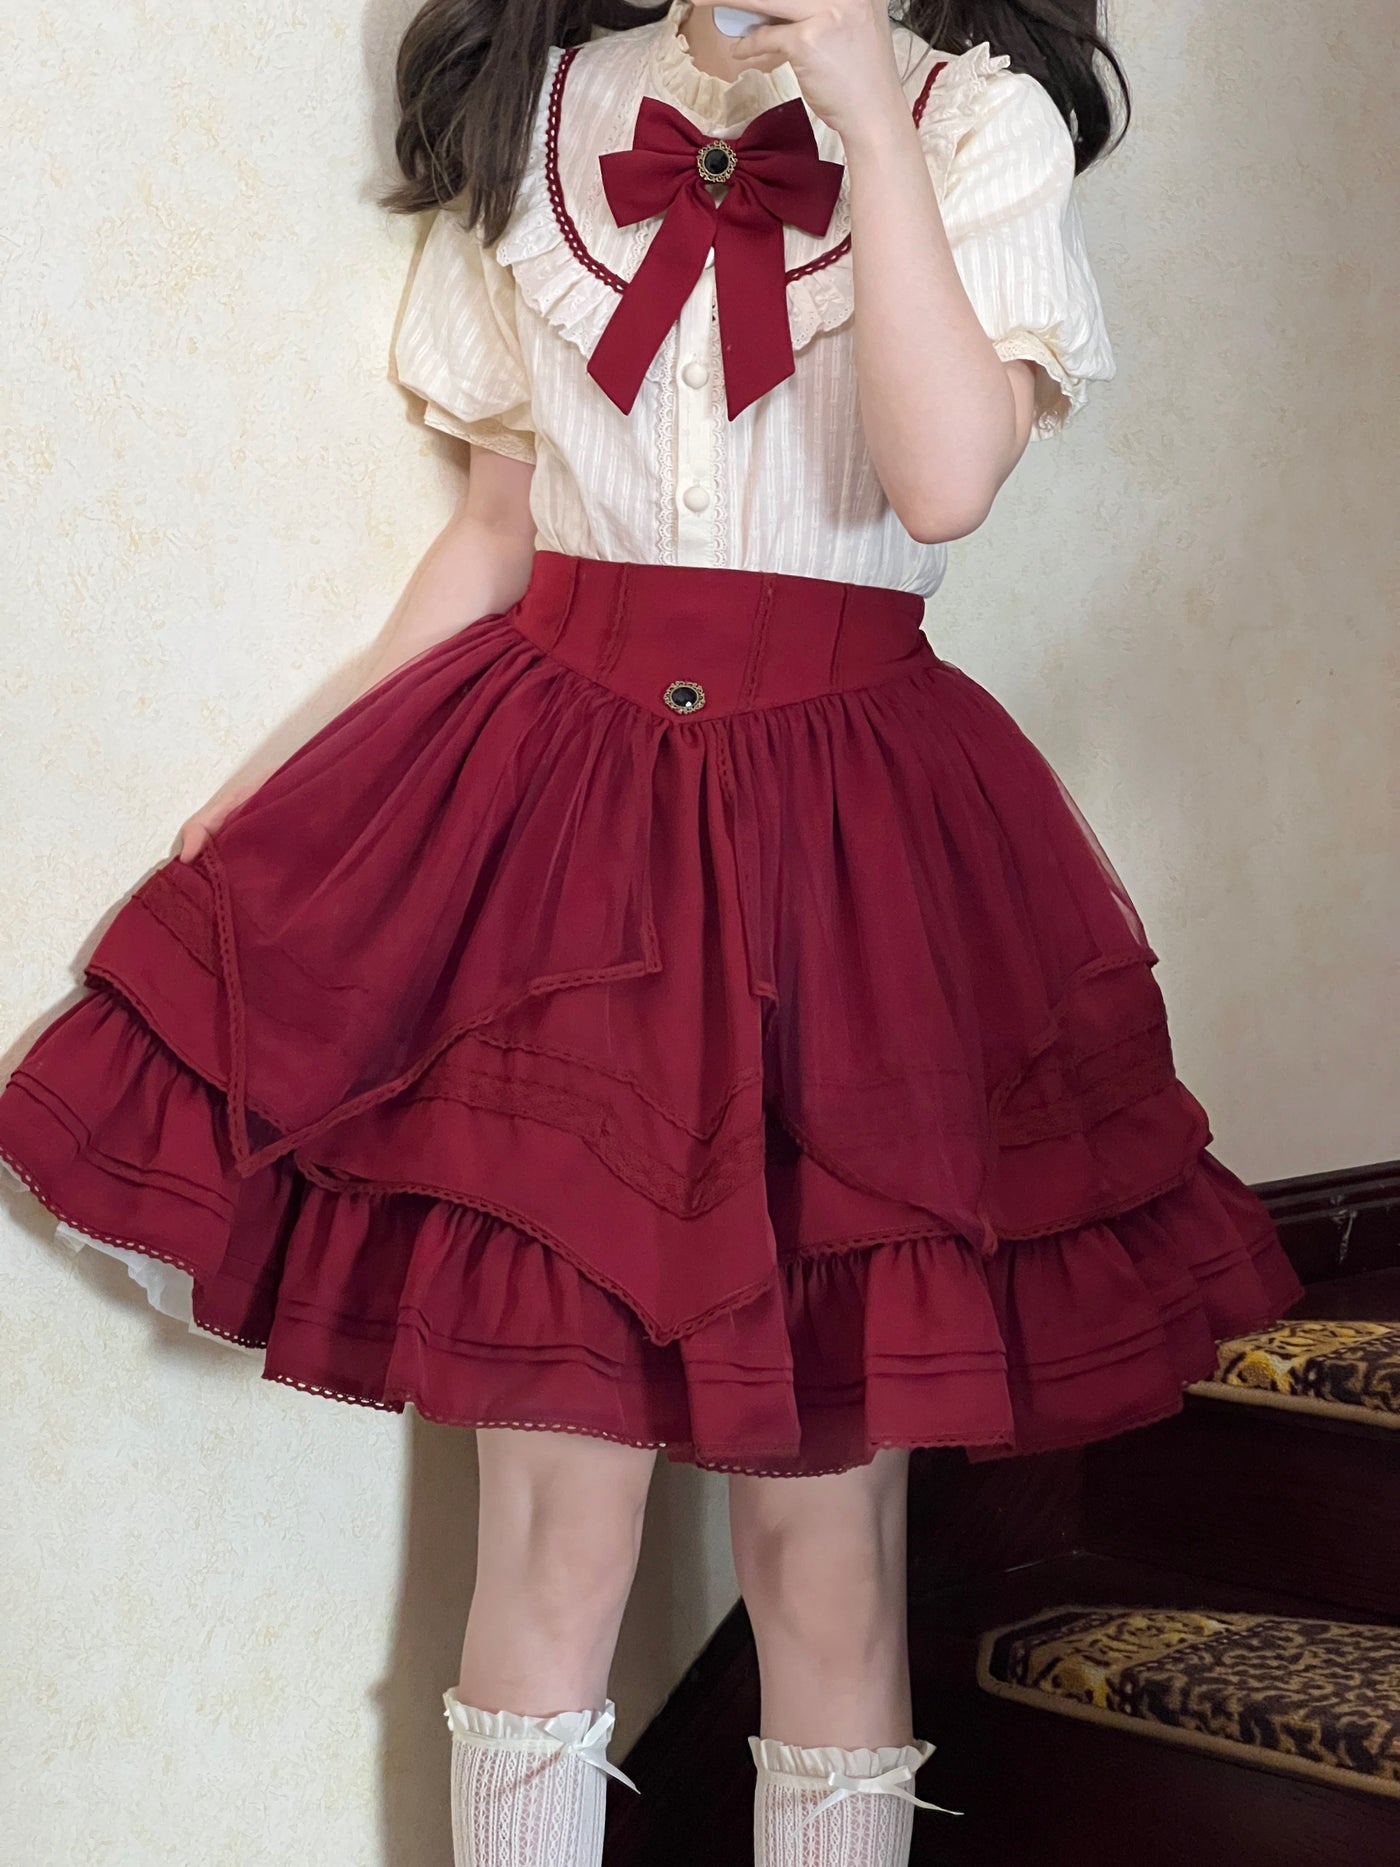 (Buy For Me) Uncle Wall's Original~Rich Girl~Elegant Lolita Blouse and Skirt S red SK 